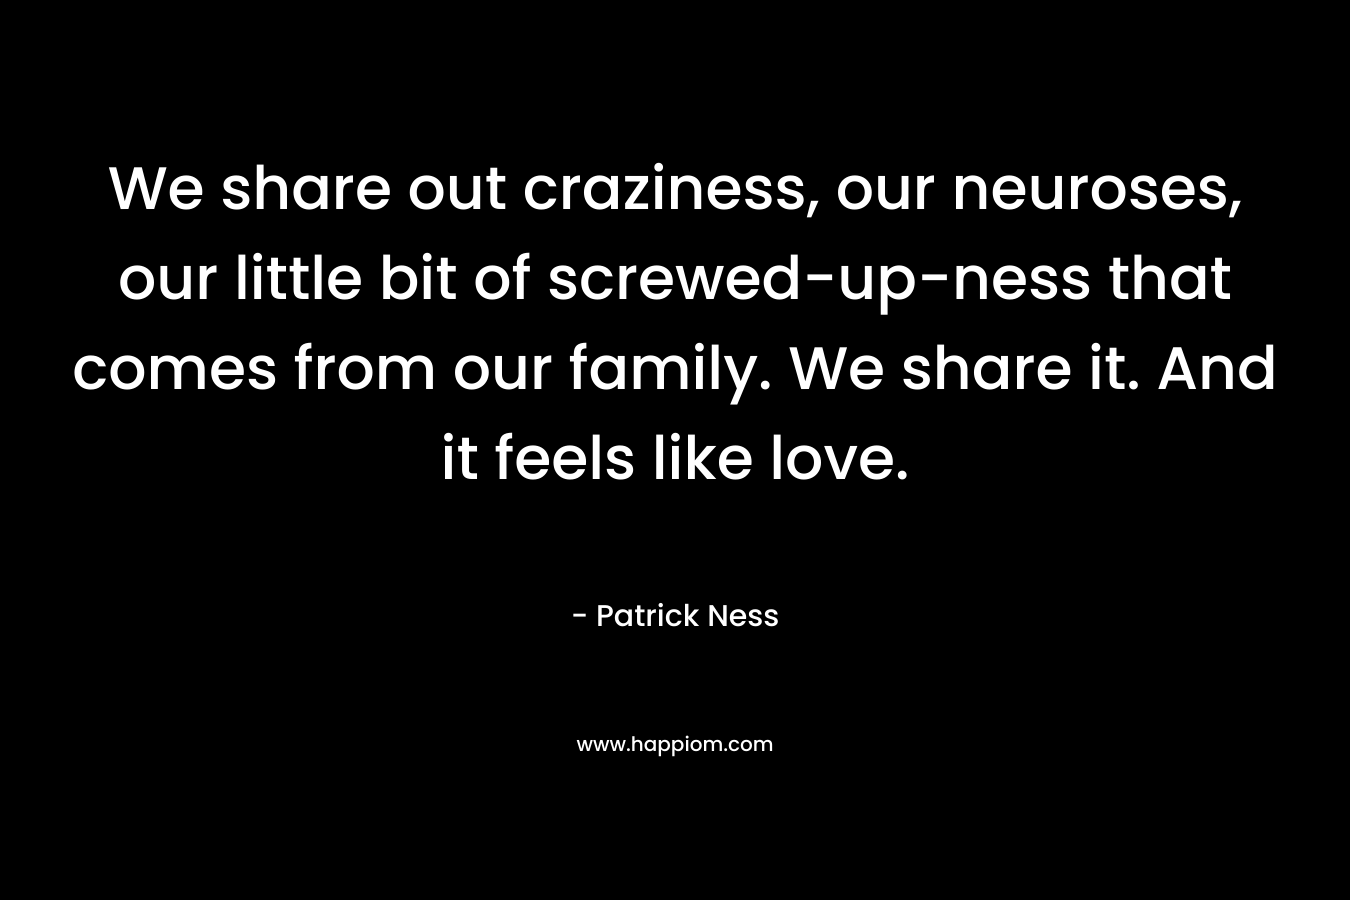 We share out craziness, our neuroses, our little bit of screwed-up-ness that comes from our family. We share it. And it feels like love.